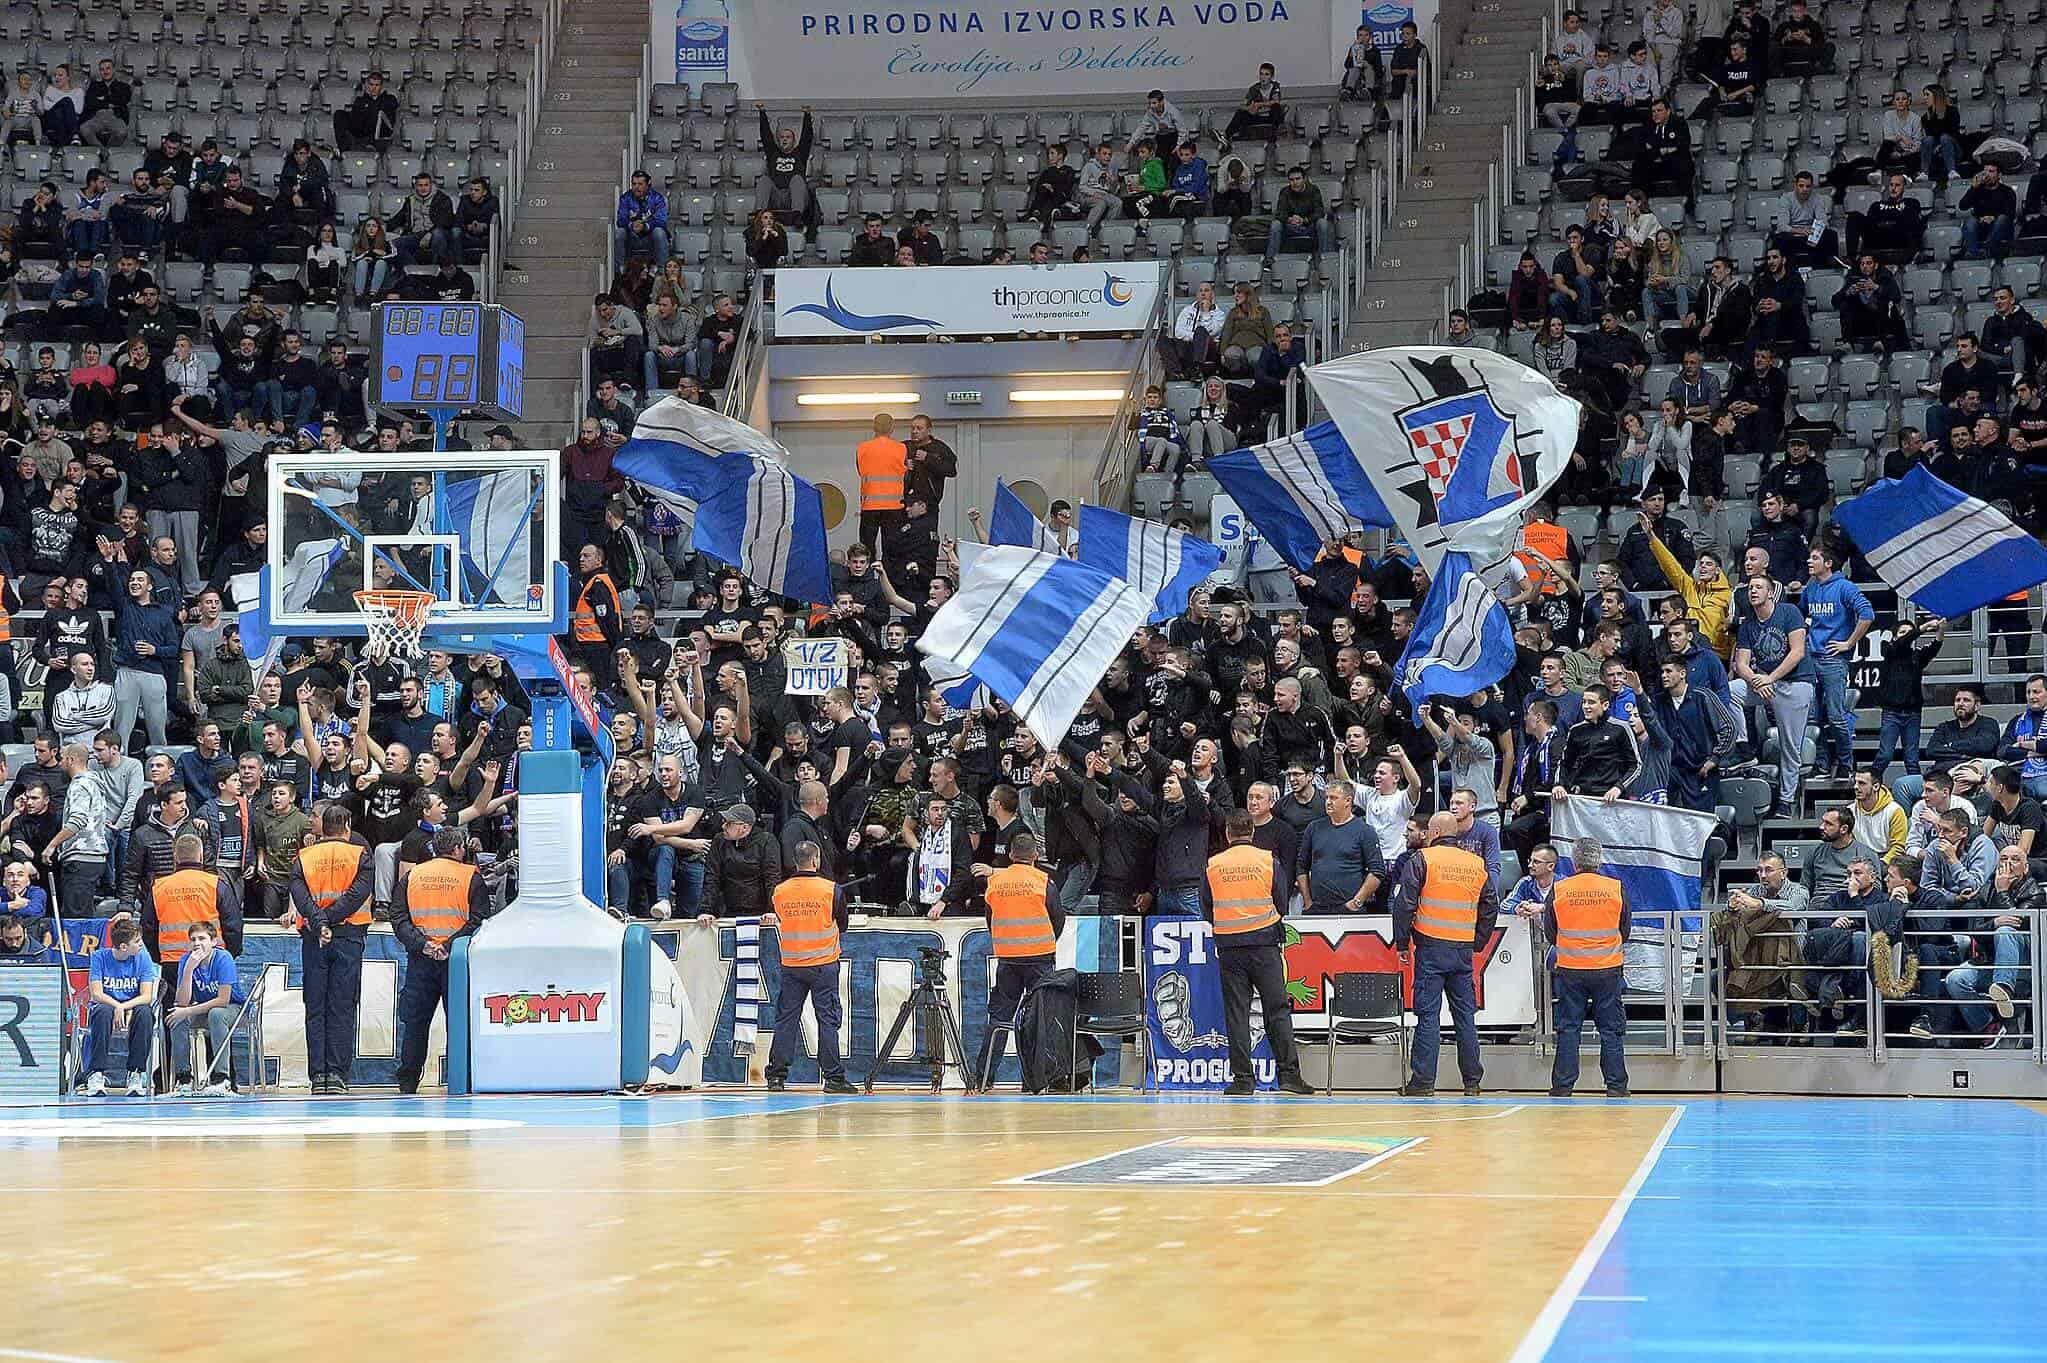 Krešimir Ćosić Arena in Zadar has already been a scene to many great basketball events